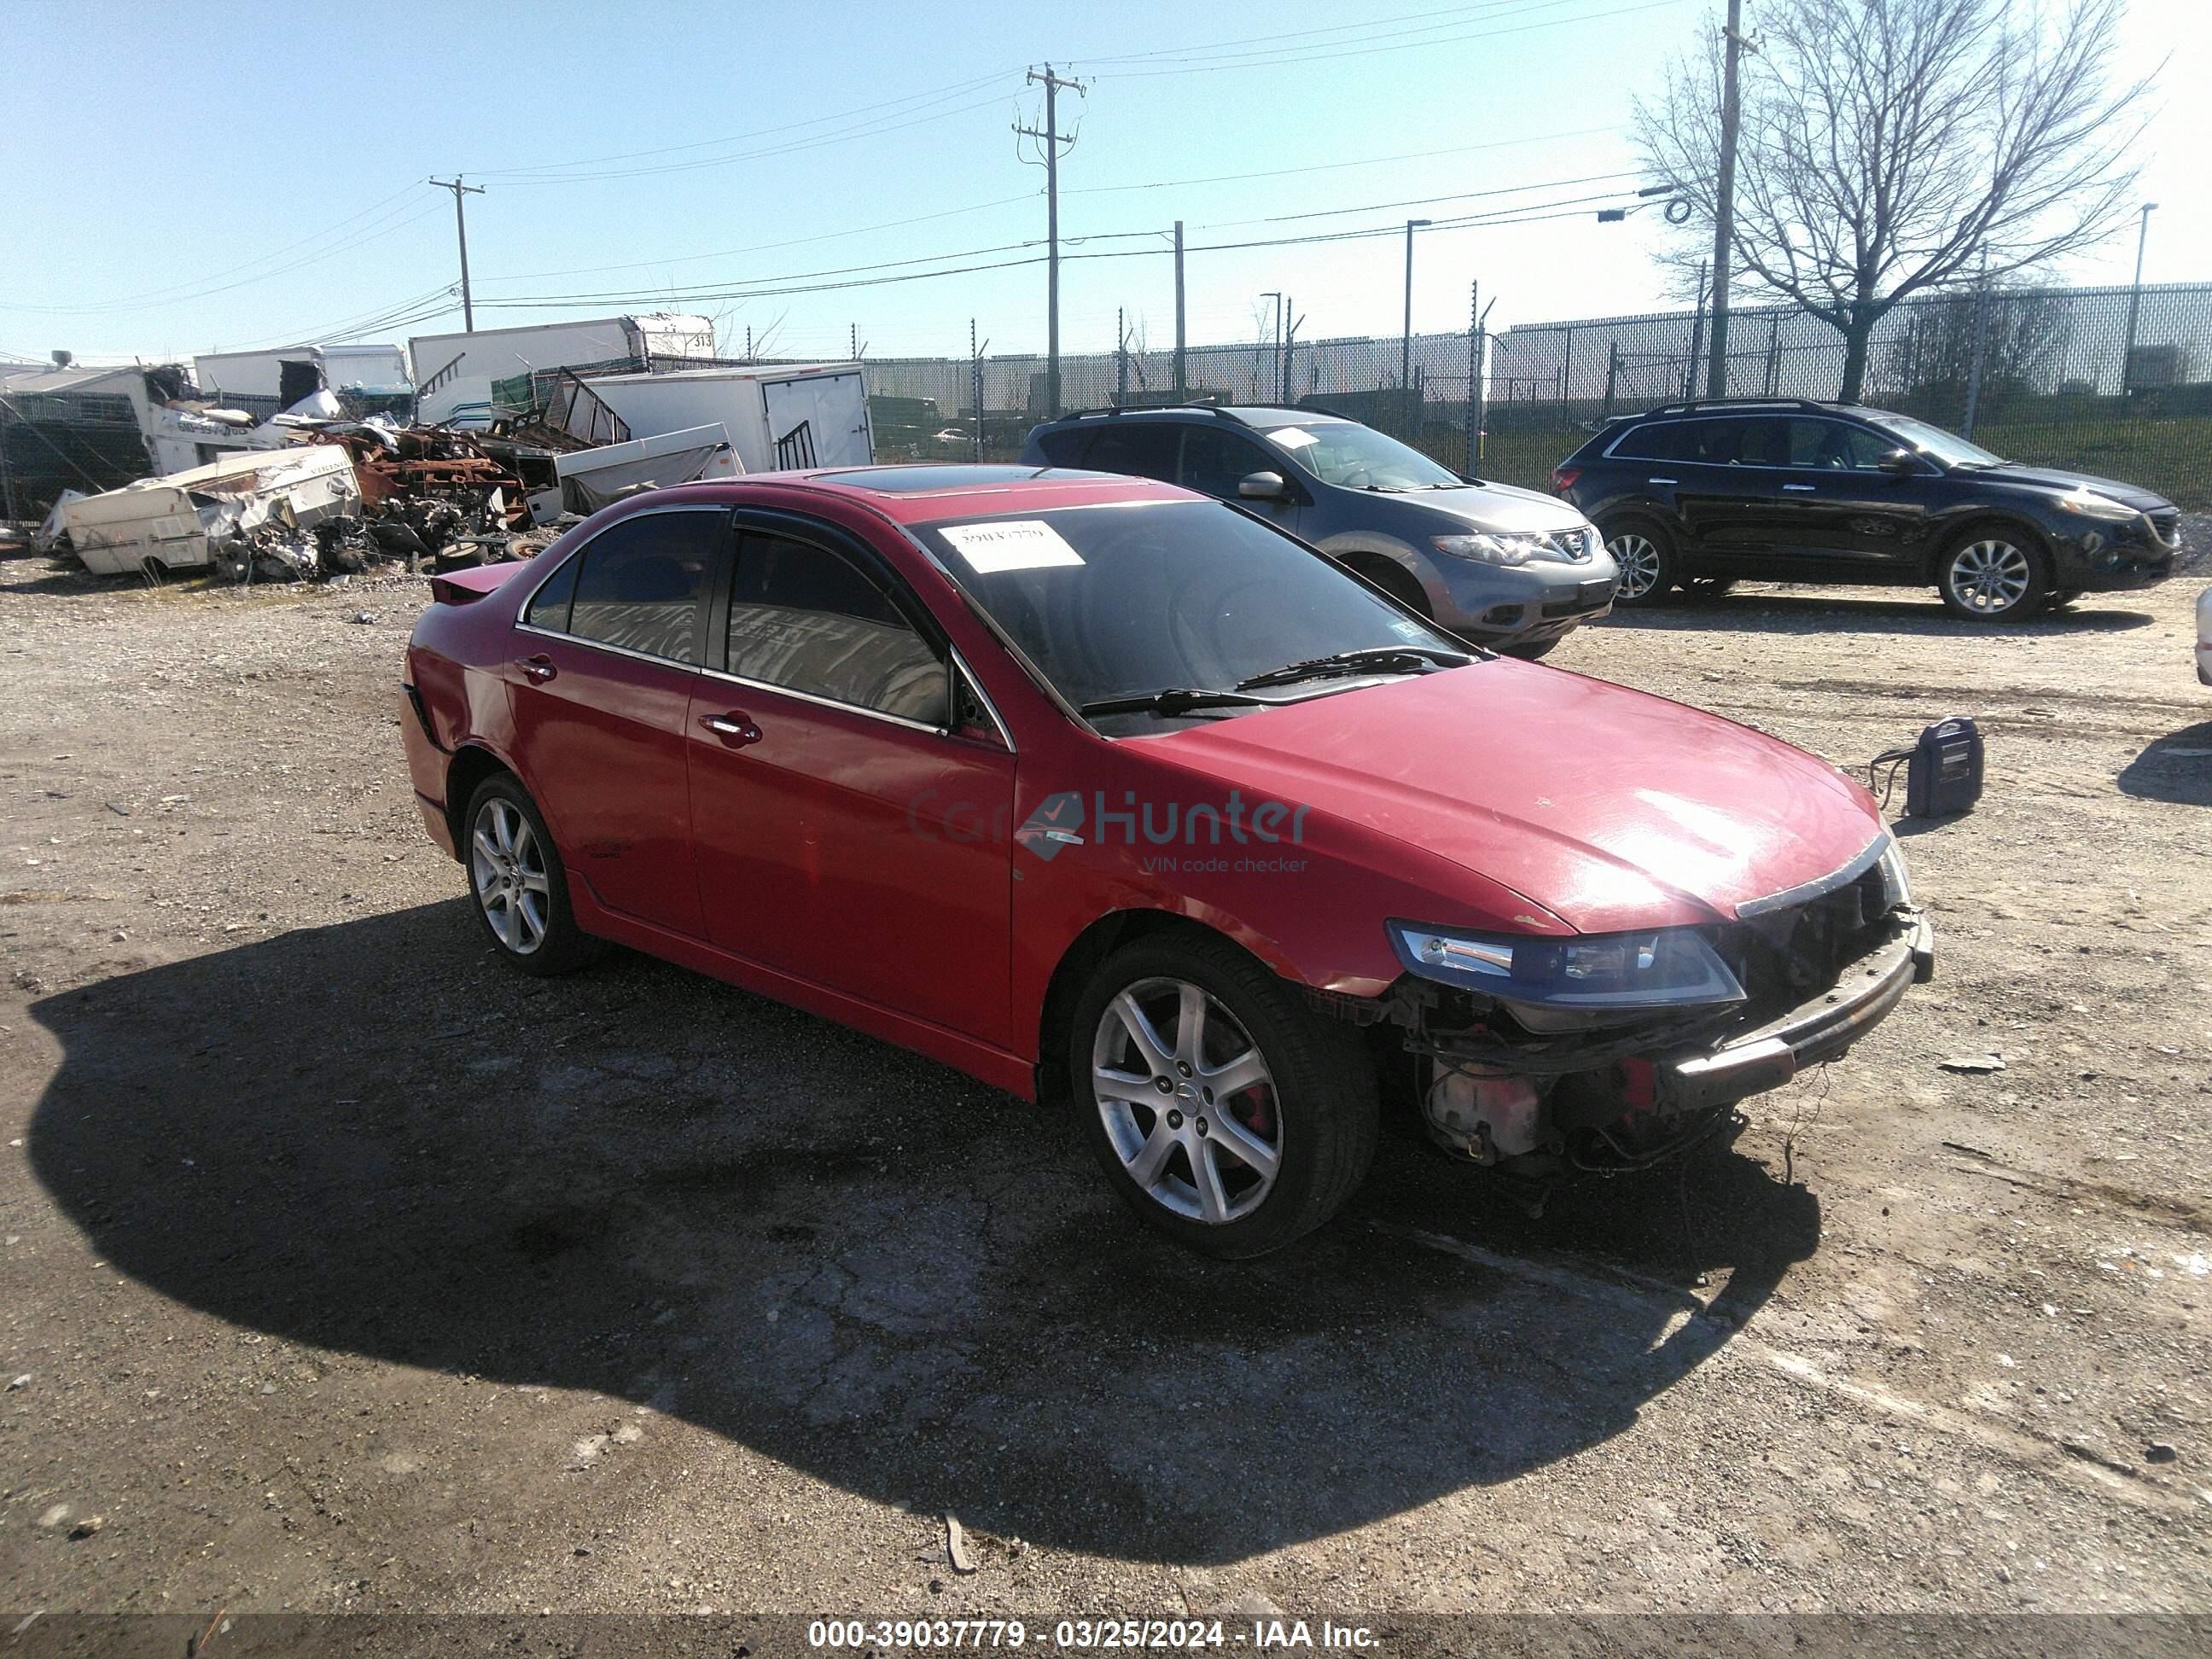 acura tsx 2005 jh4cl96875c019218